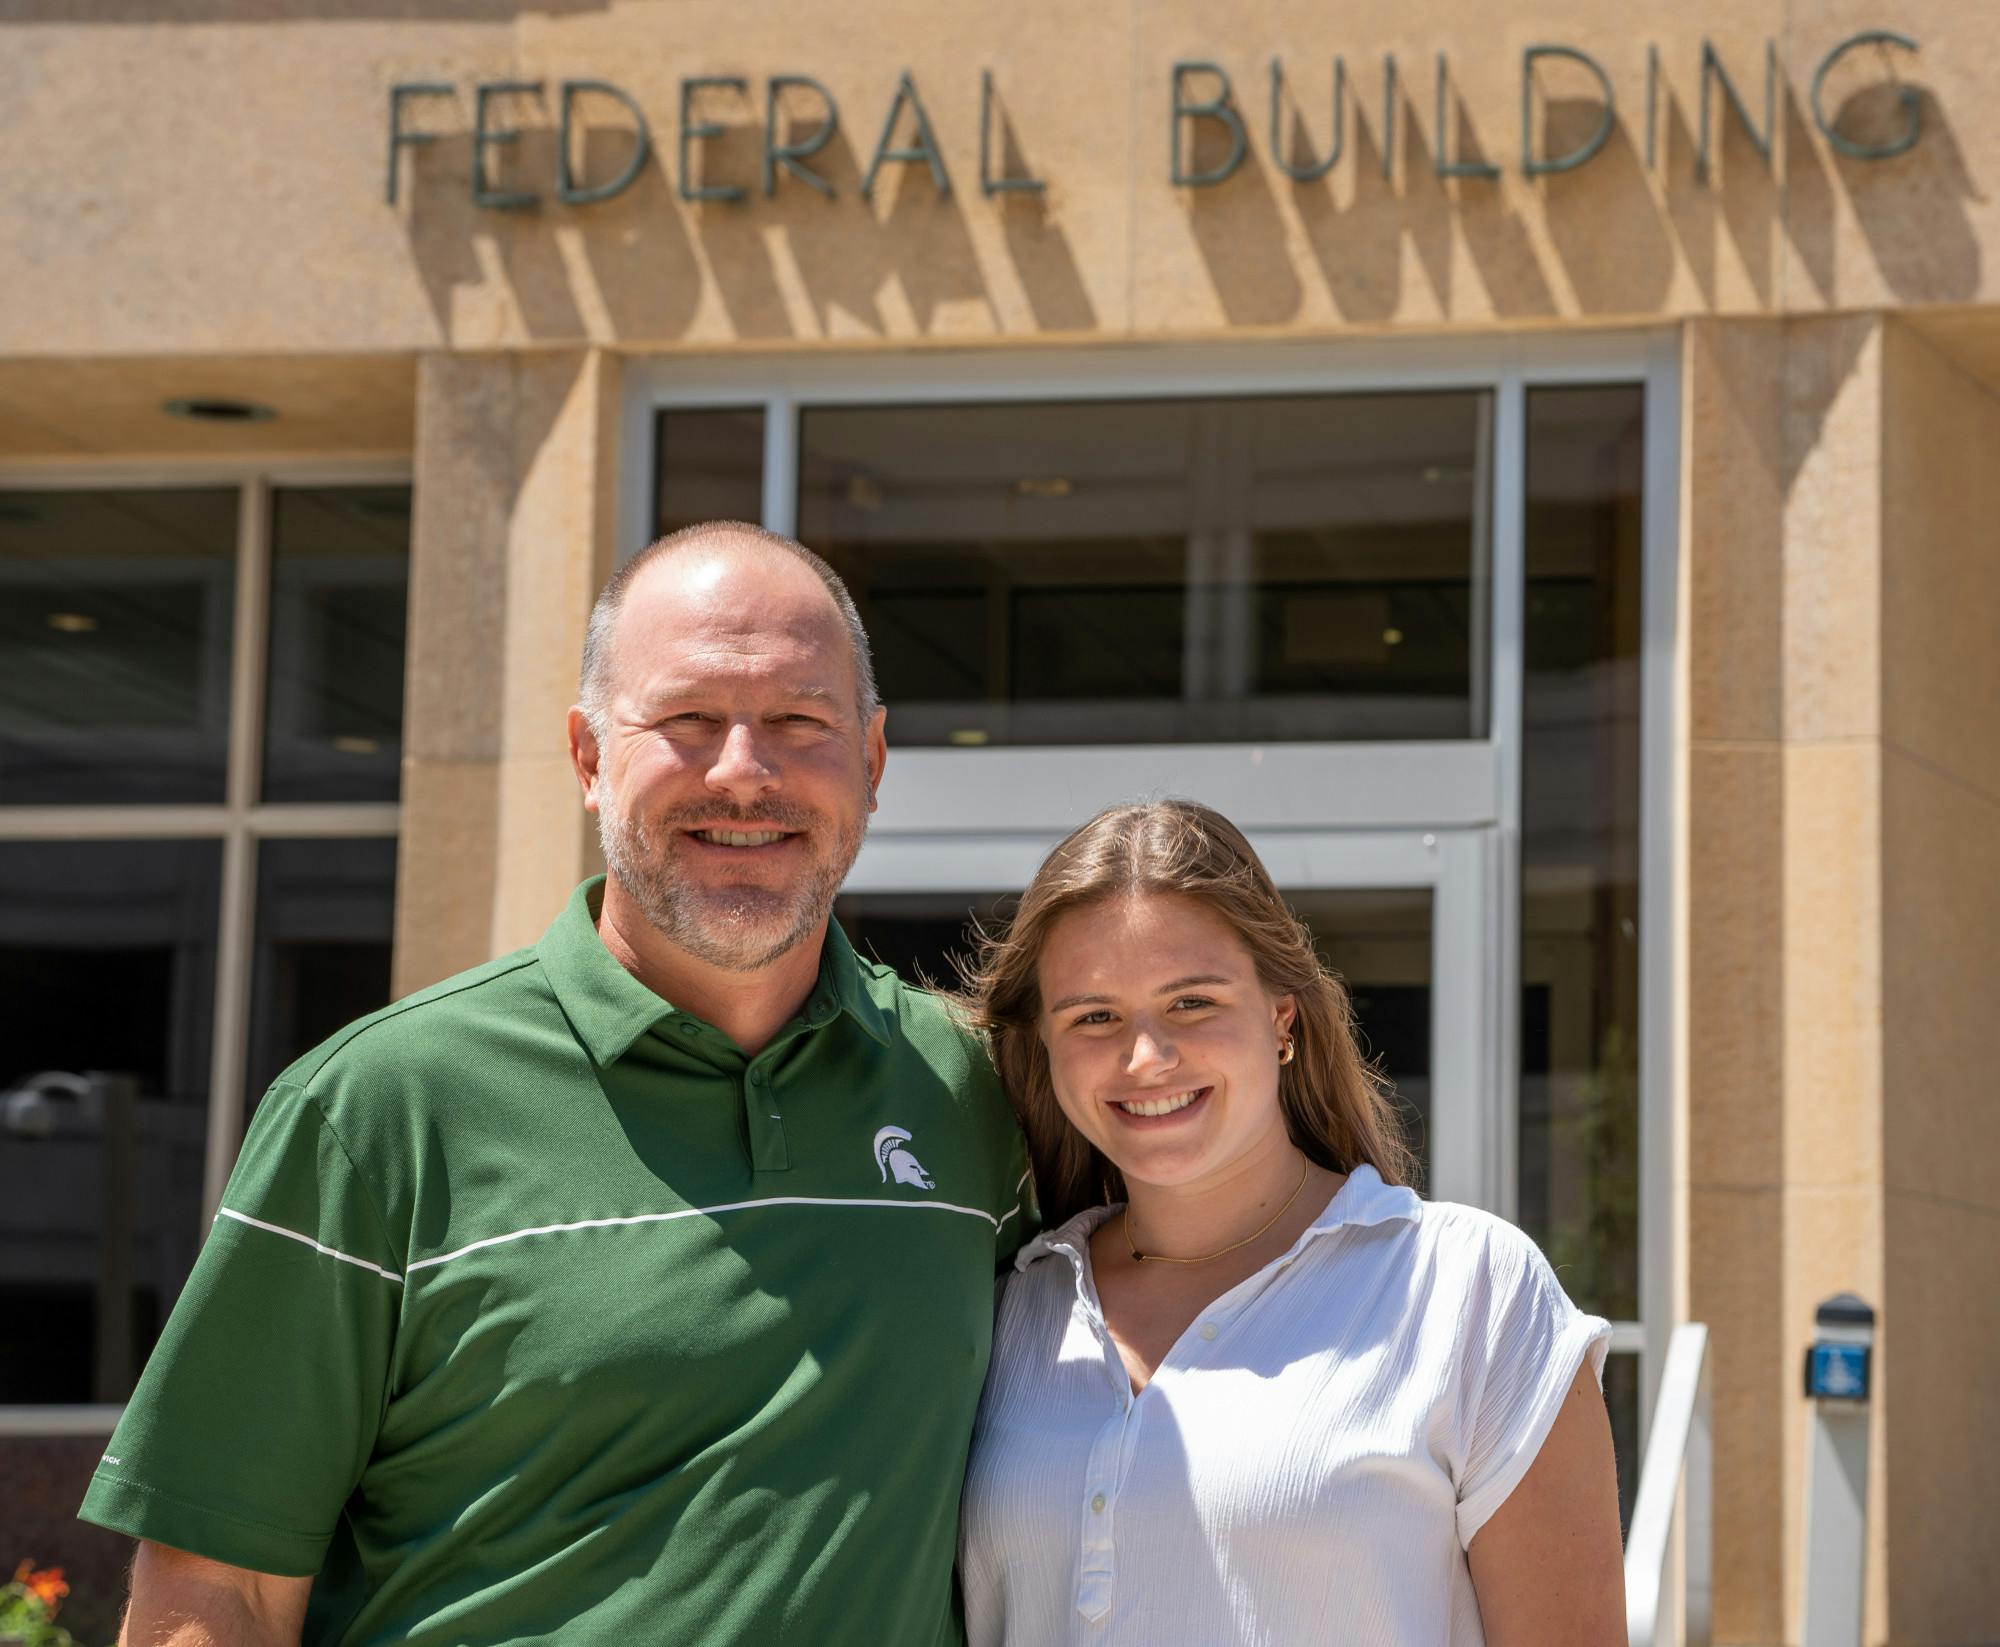 <p>Mike and Sophia Balow pose for a portrait outside of the Federal Building in Lansing on July 21, 2022.</p>